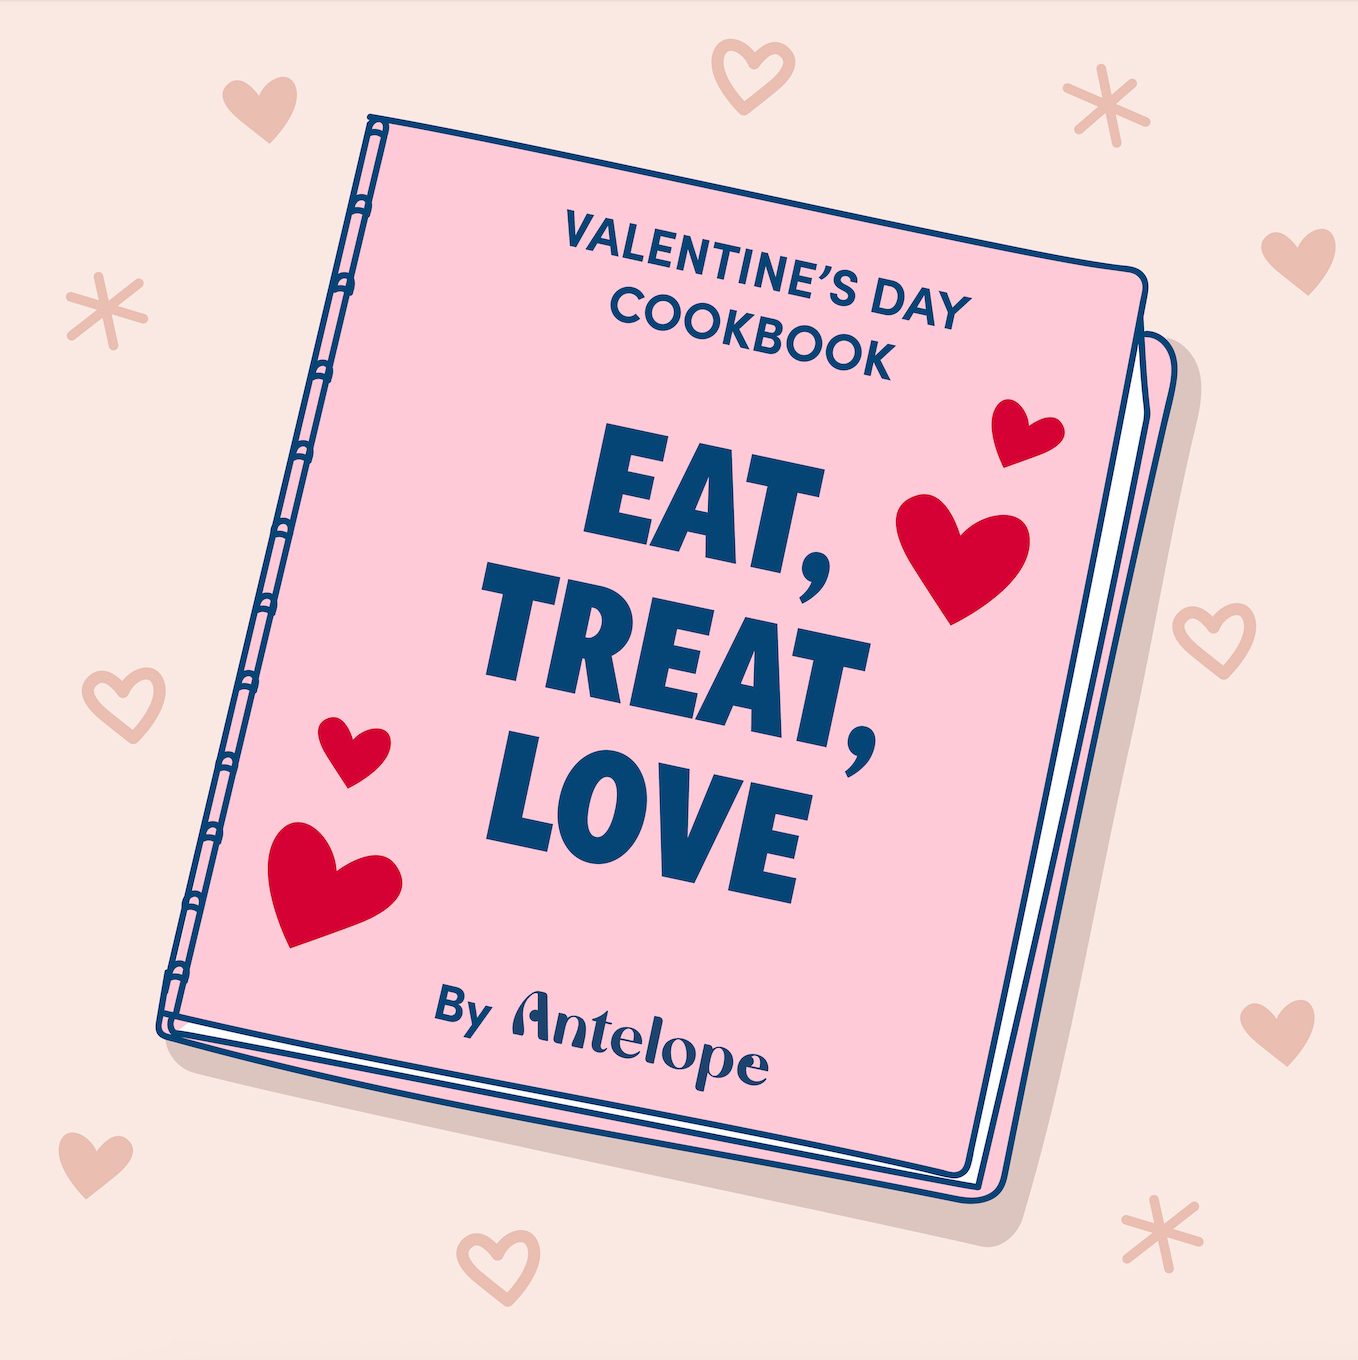 A pink and cream graphic that says Valentine's Day Cookbook EAT, TREAT, LOVE. This is Antelope's official Valentine's Day cookbook for pets. 